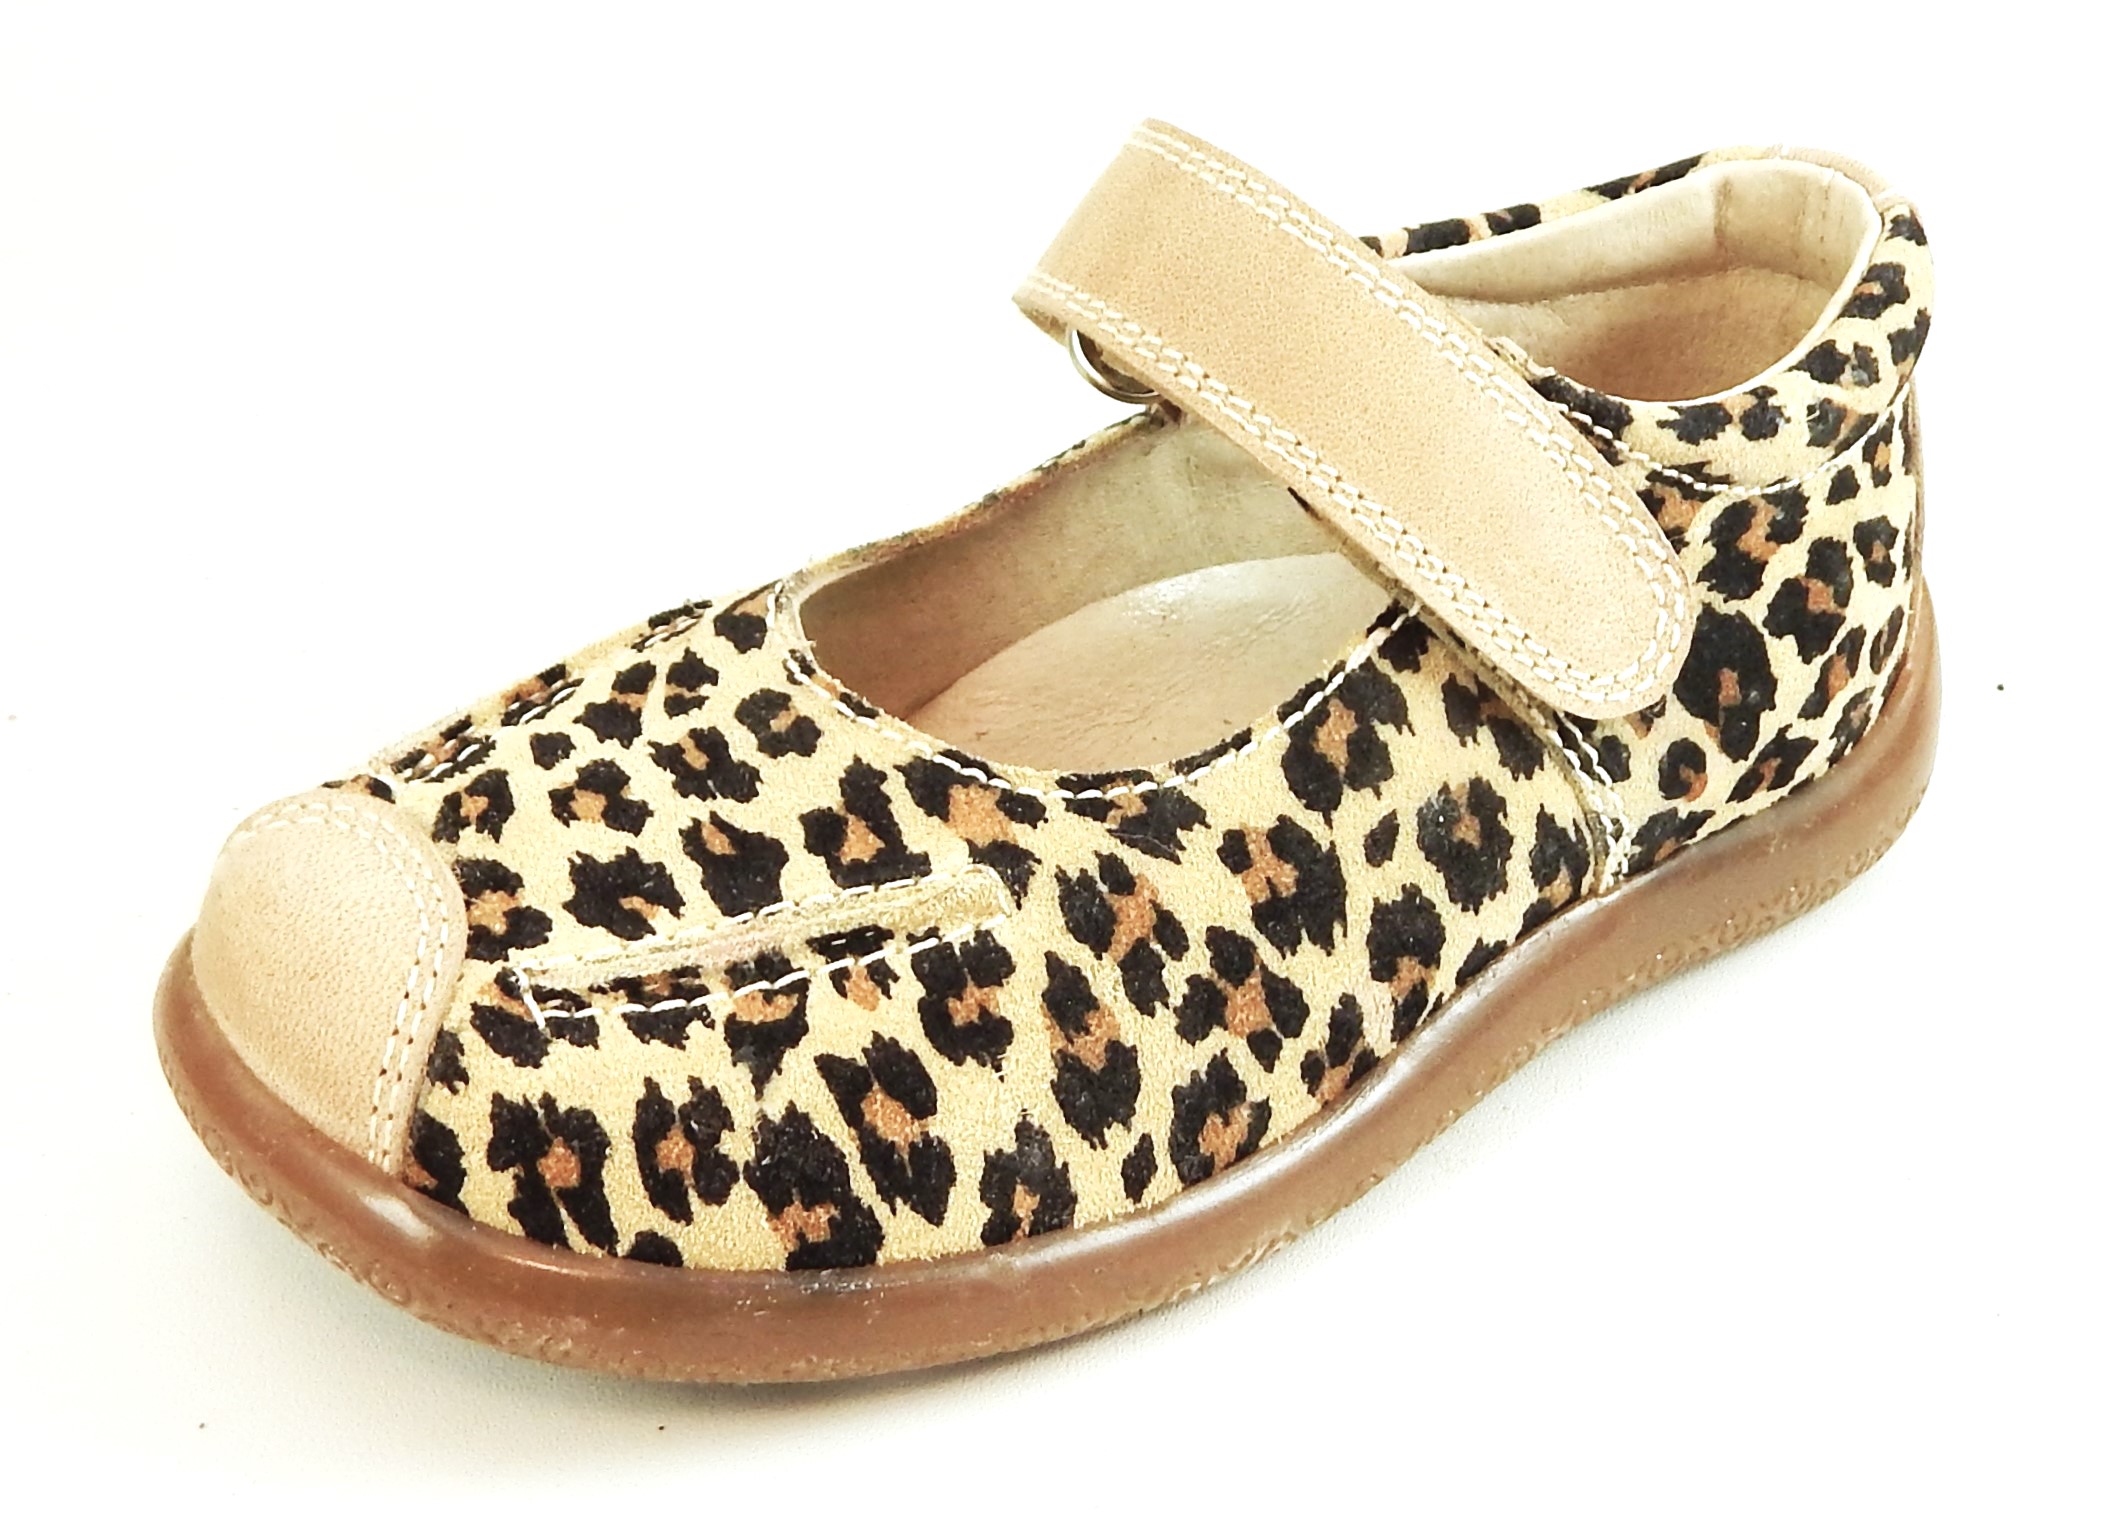 FARO B-7301 - Leopard Suede Mary Janes - Euro 25 Size 8